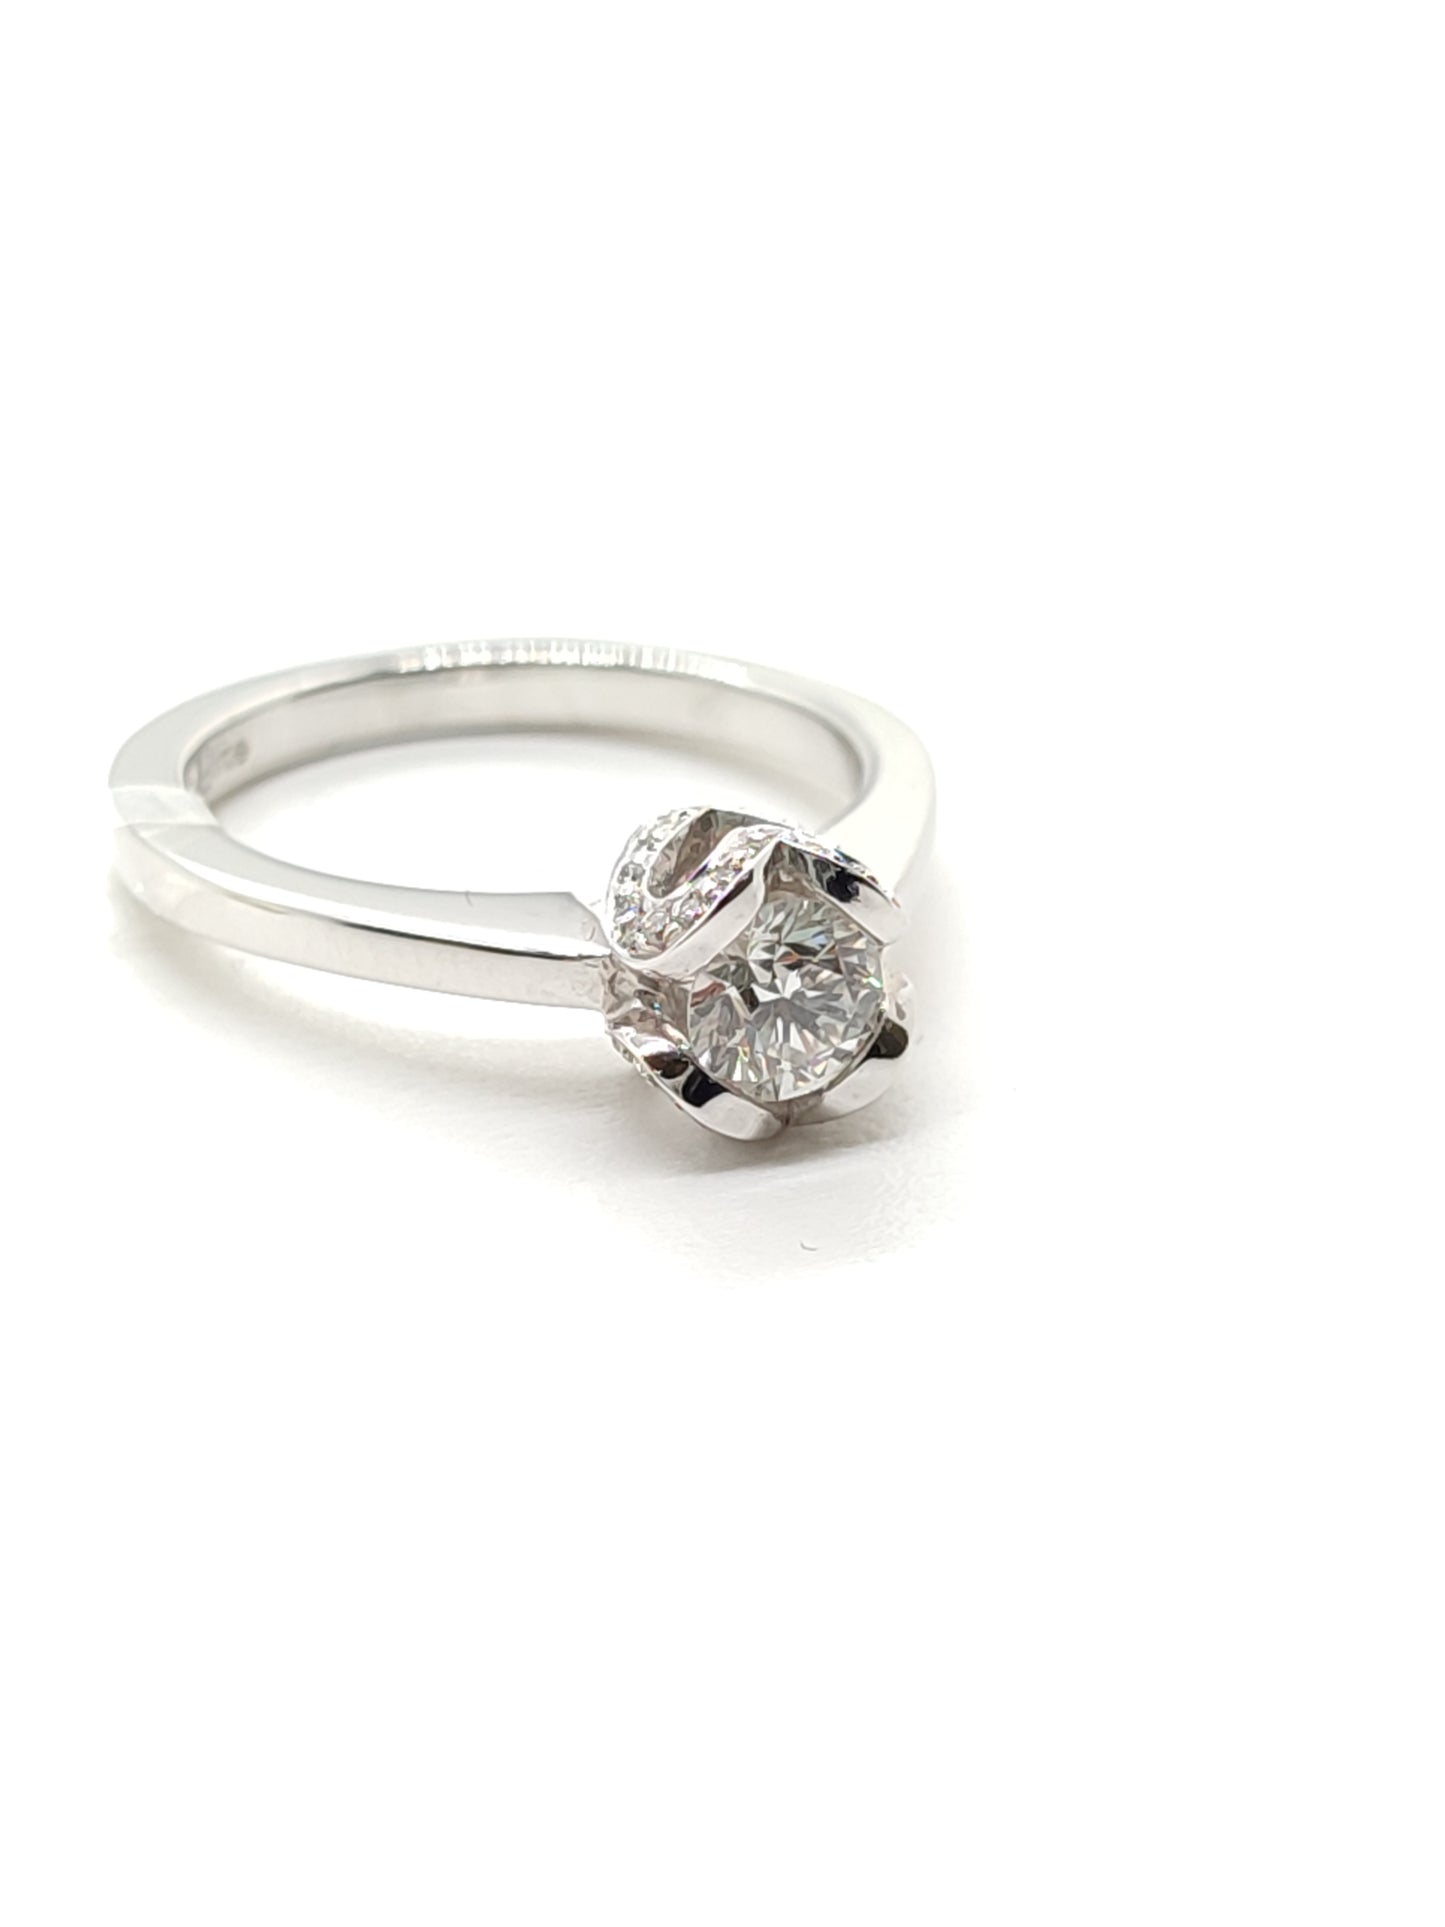 Gold solitaire ring with 0.52 ct diamond